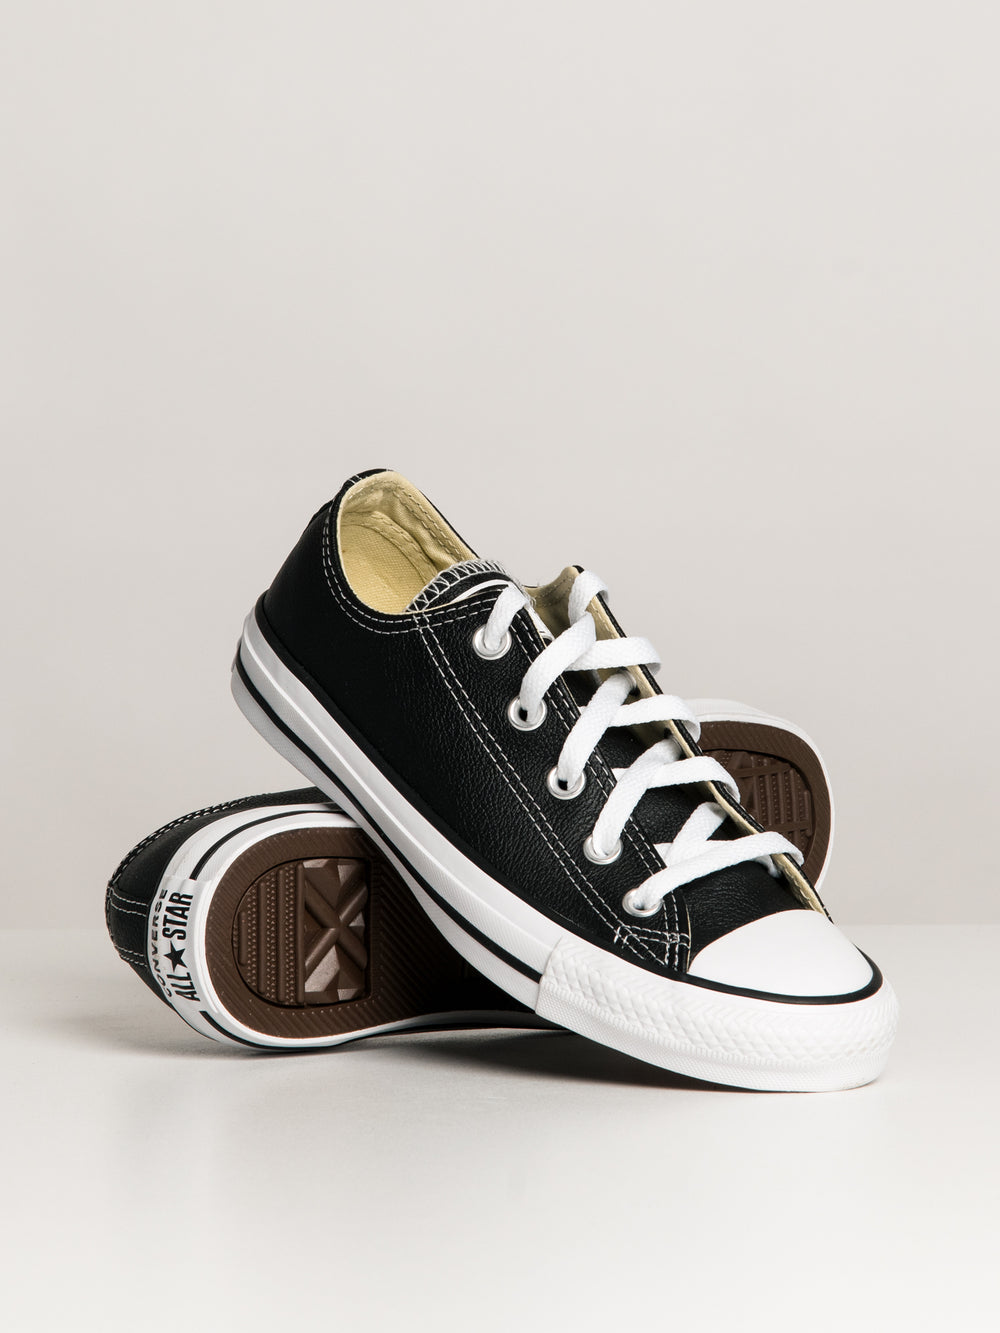 WOMENS CONVERSE CTAS LEATHER OX SNEAKER